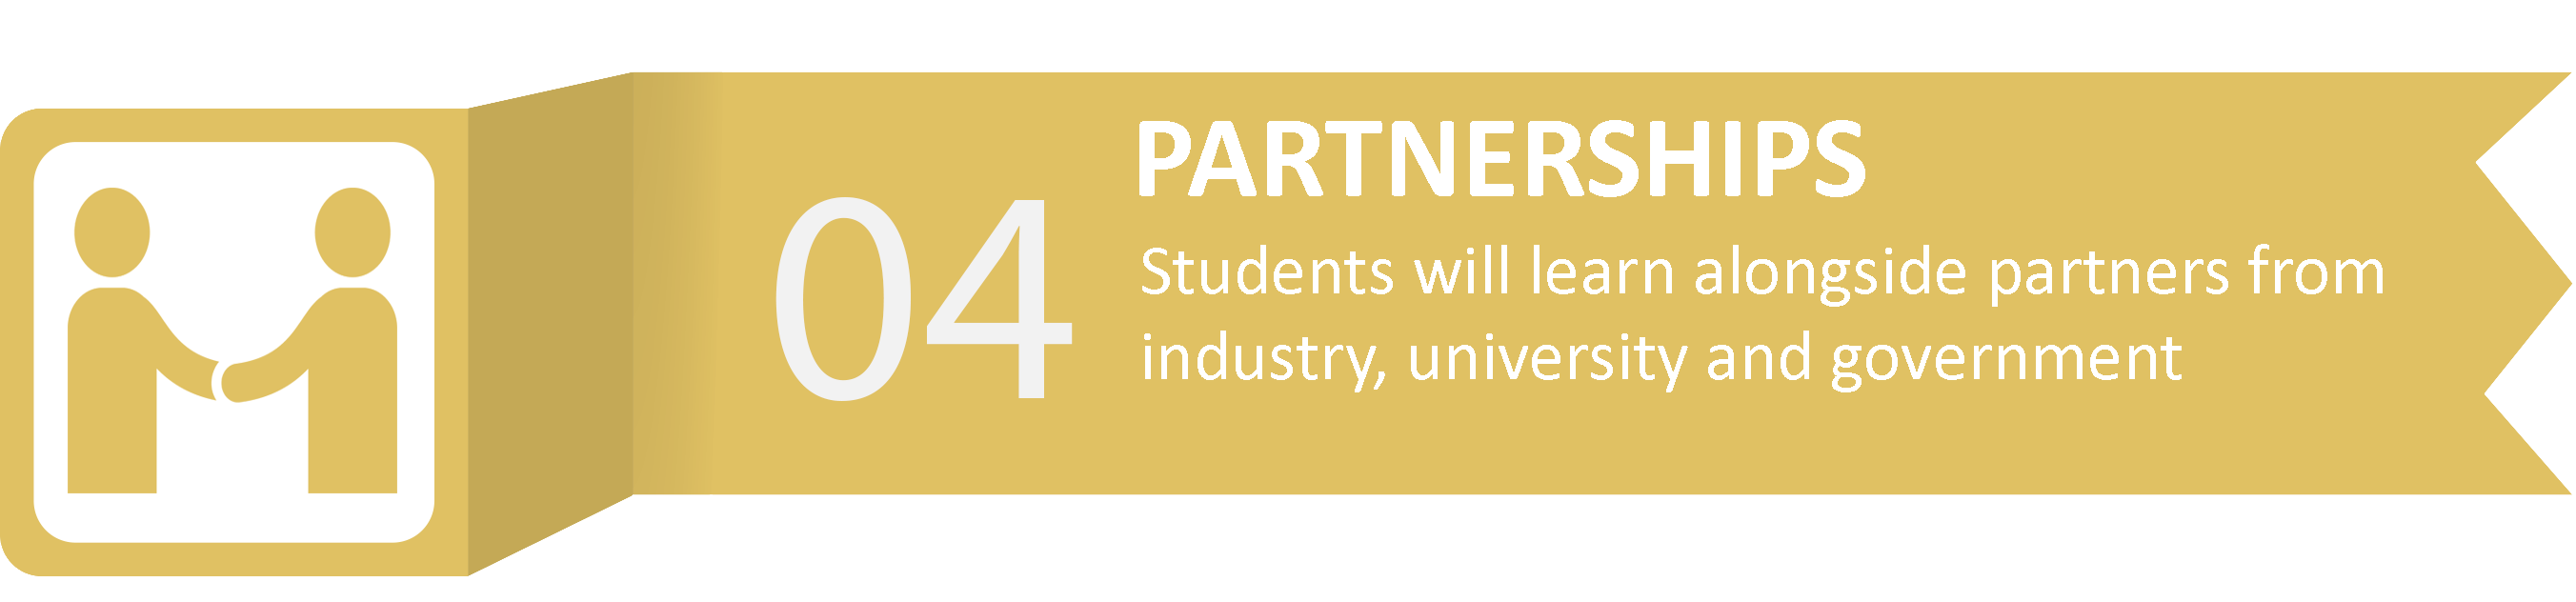 Learning Partnerships - Students will learn alongside partners from industry, university and government.